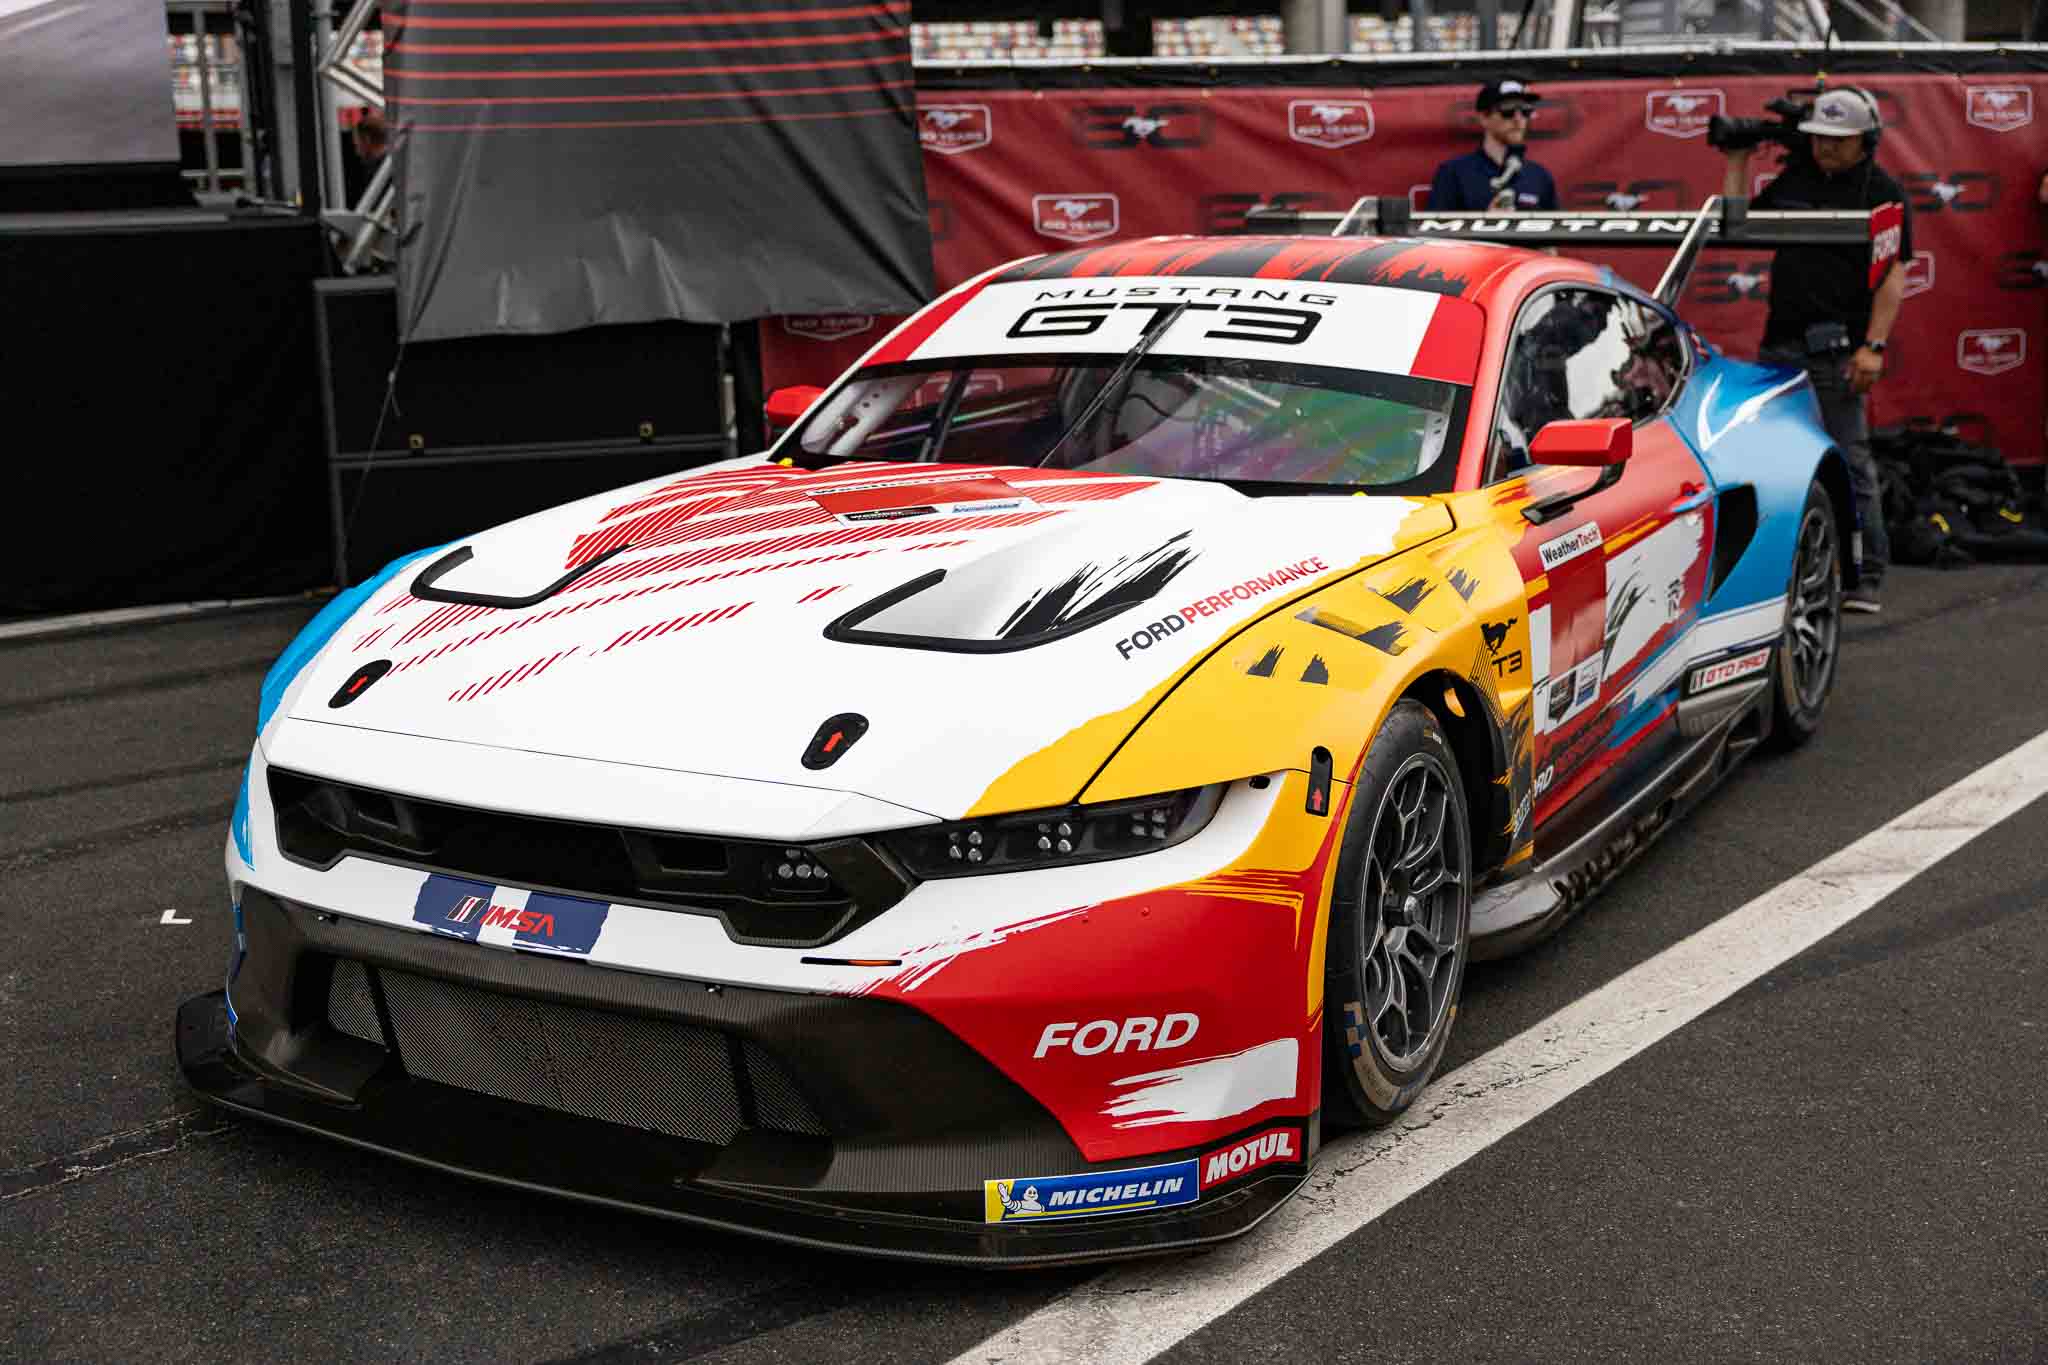 The new "Champion Spirit" livery on the Mustang GT3